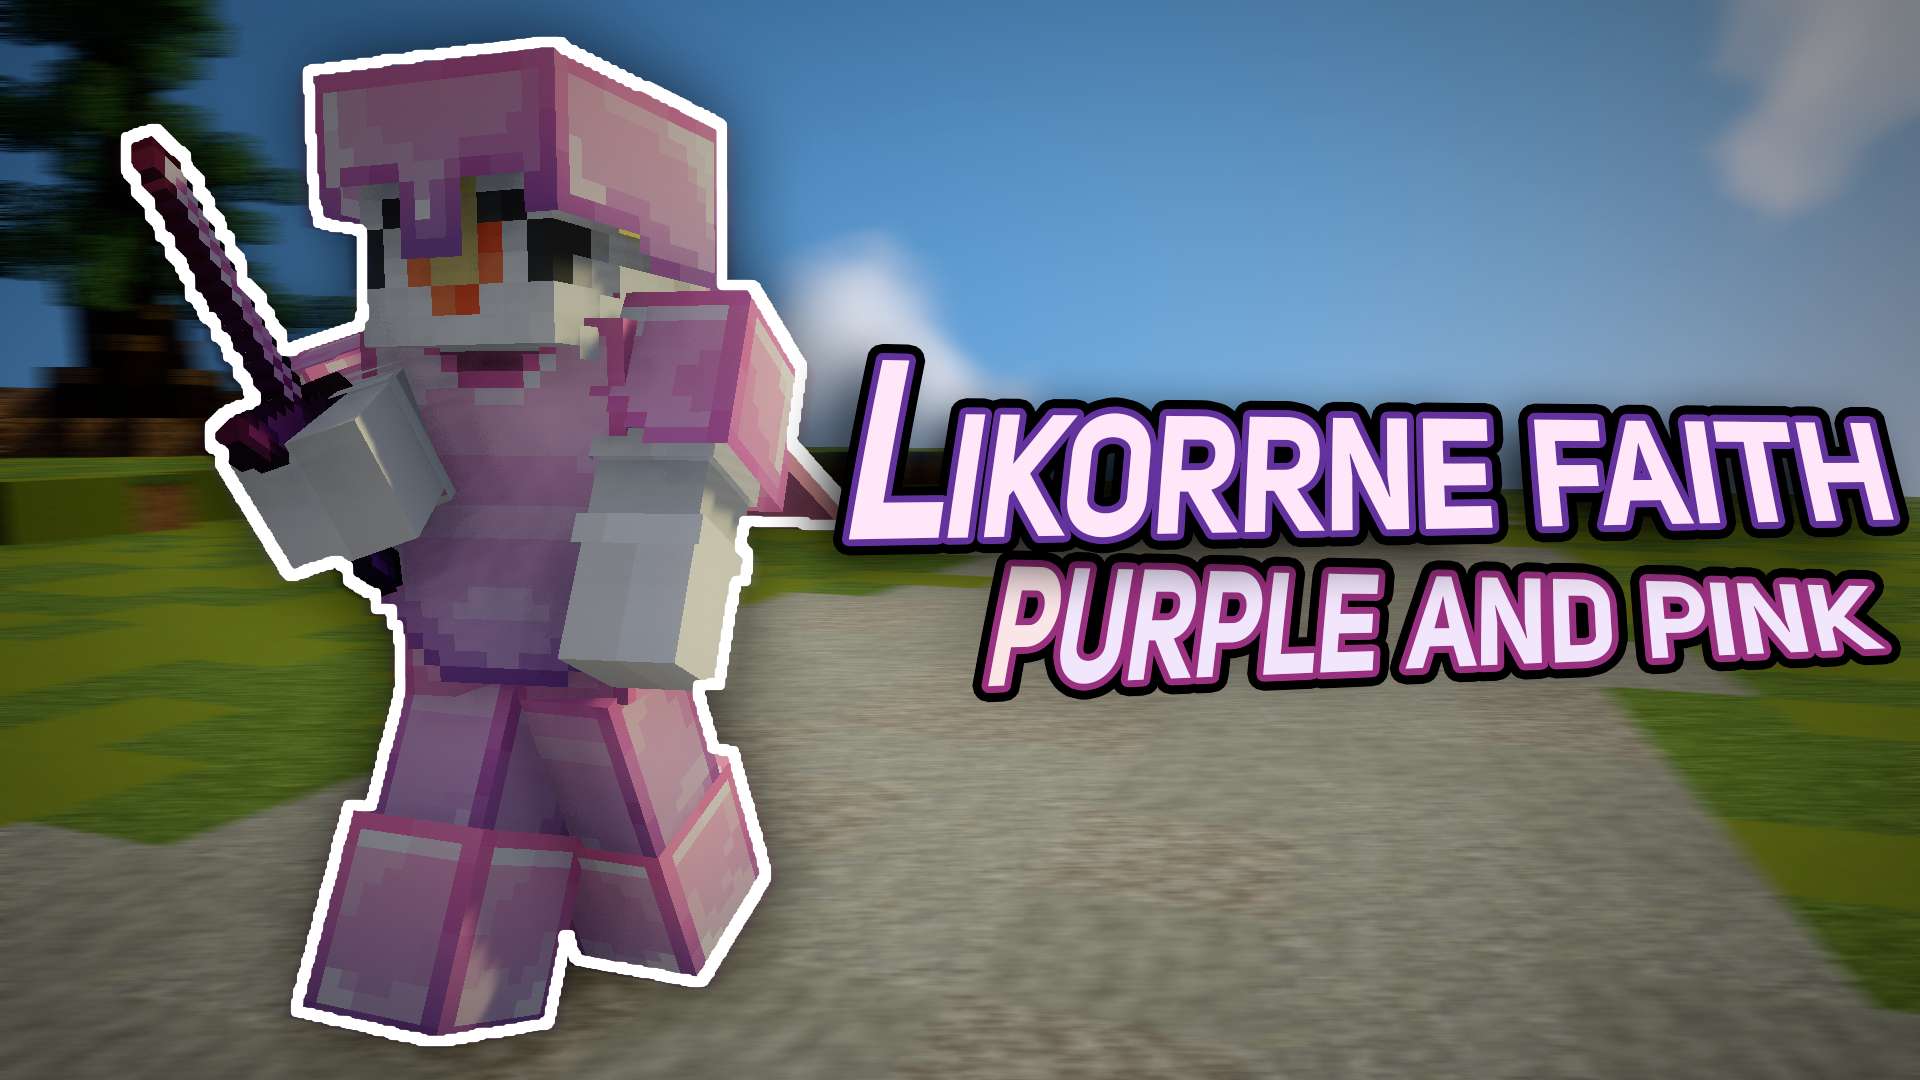 Likorrne Faith (Purple and pink) 32x by Likorrne on PvPRP